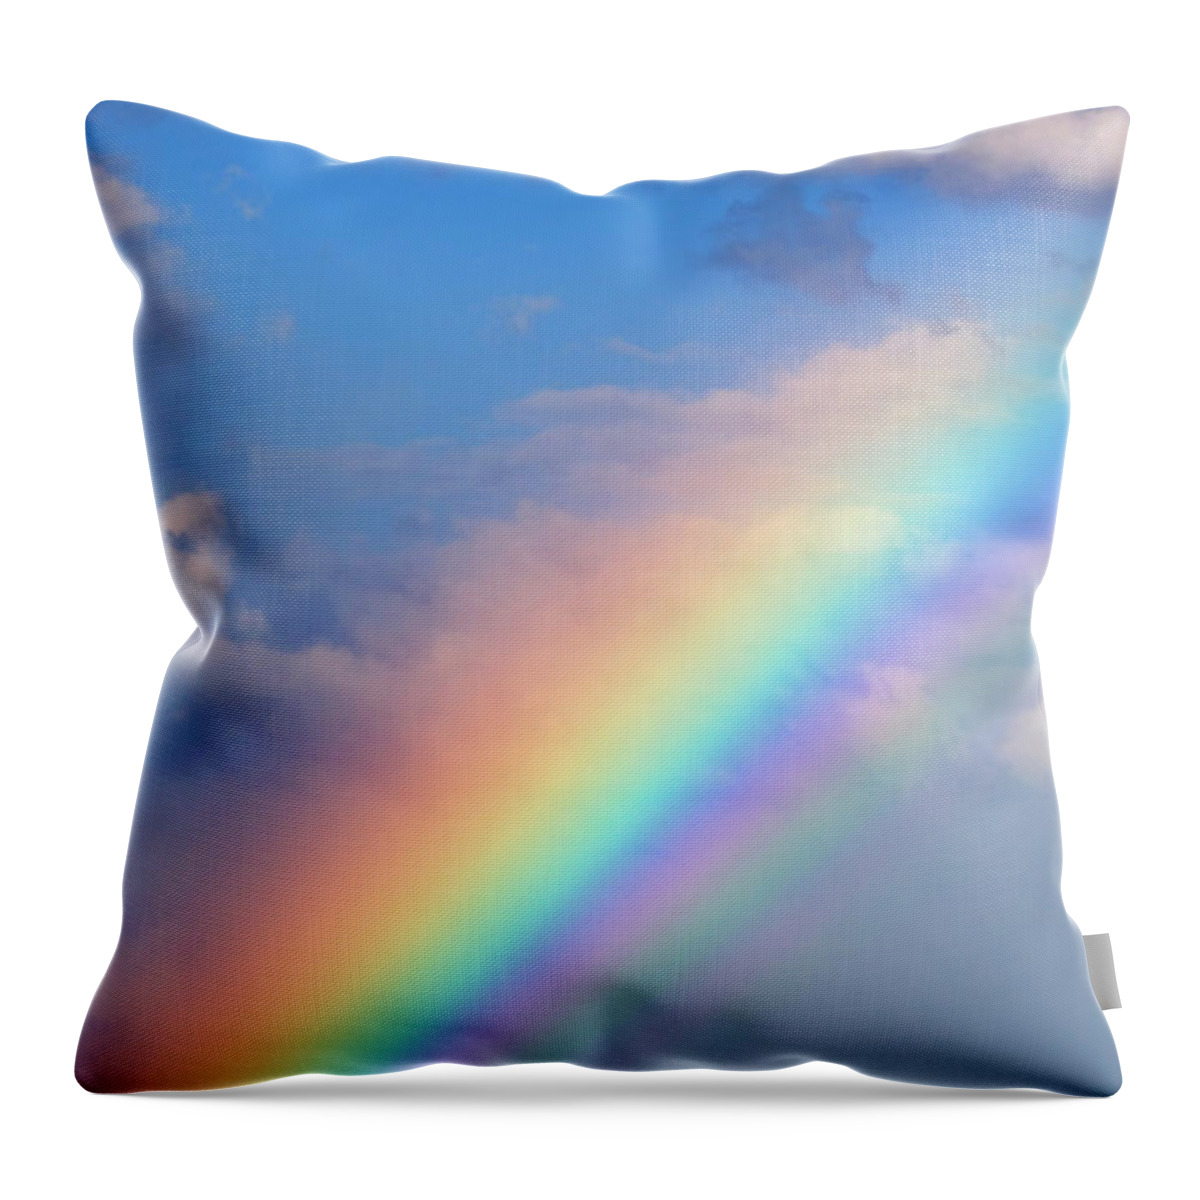 Scenics Throw Pillow featuring the photograph Rainbow With Blue Sky And Clouds by Wesley Hitt